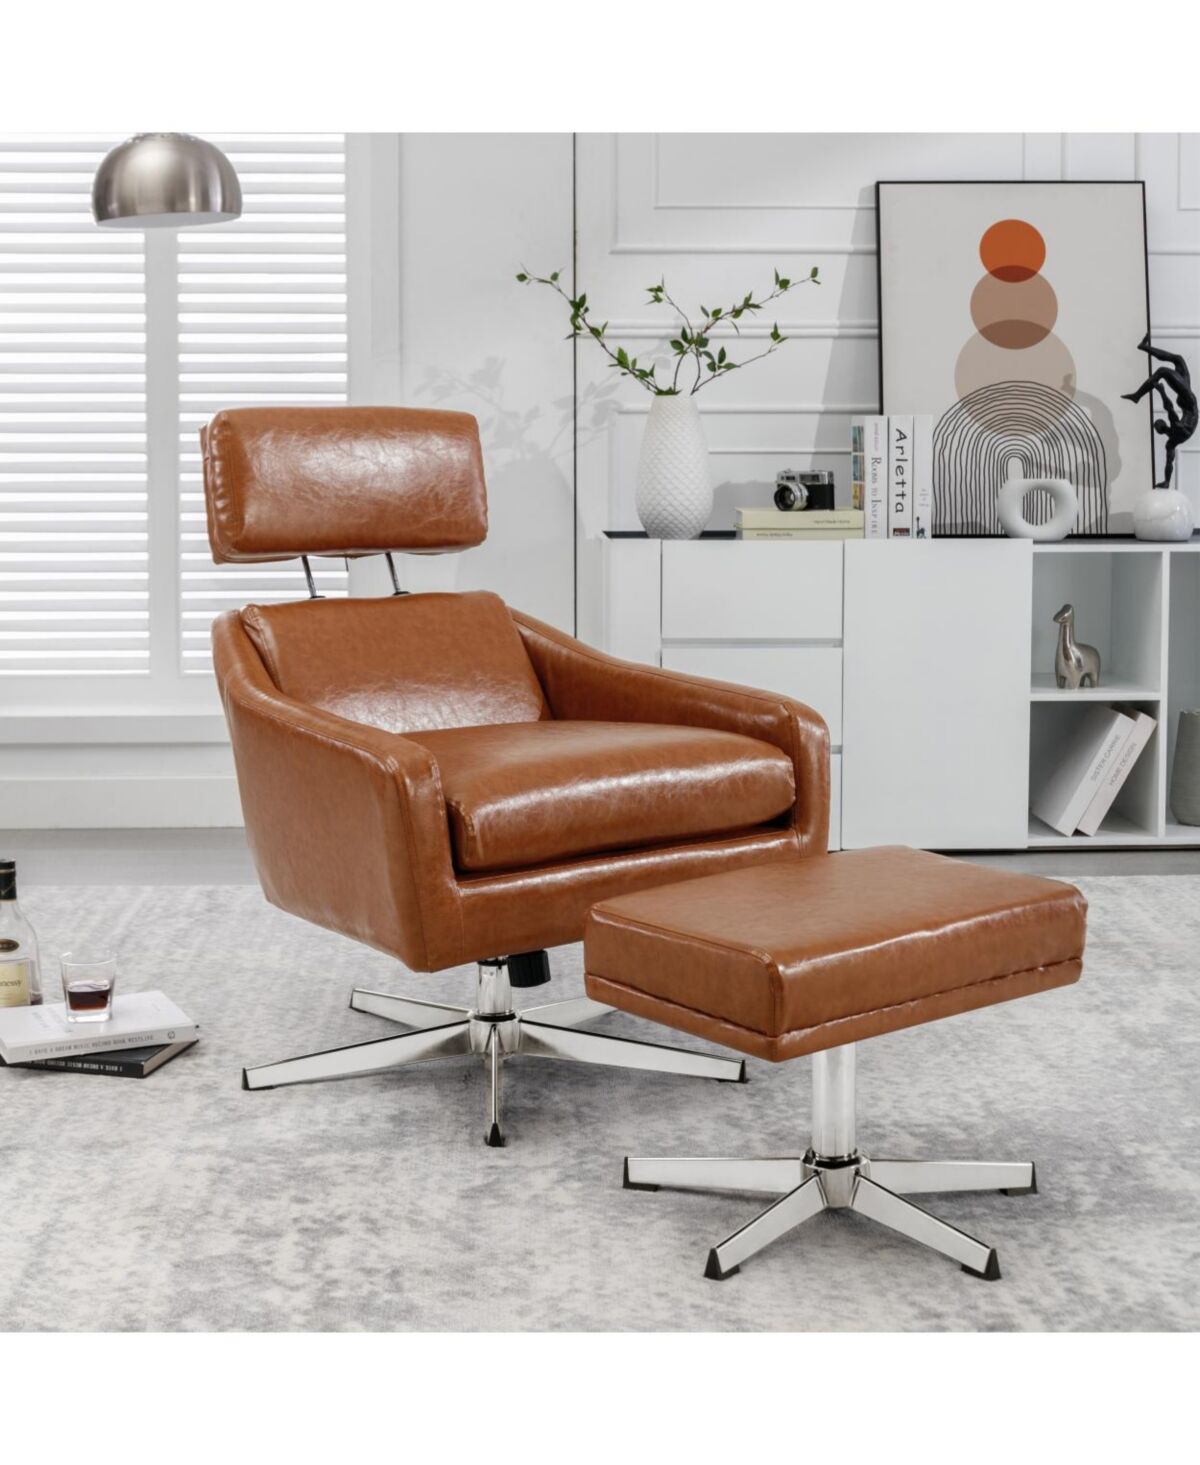 Simplie Fun Pu Leather Swivel Armchair with Ottoman for Living Room, Bedroom, Office - Brown